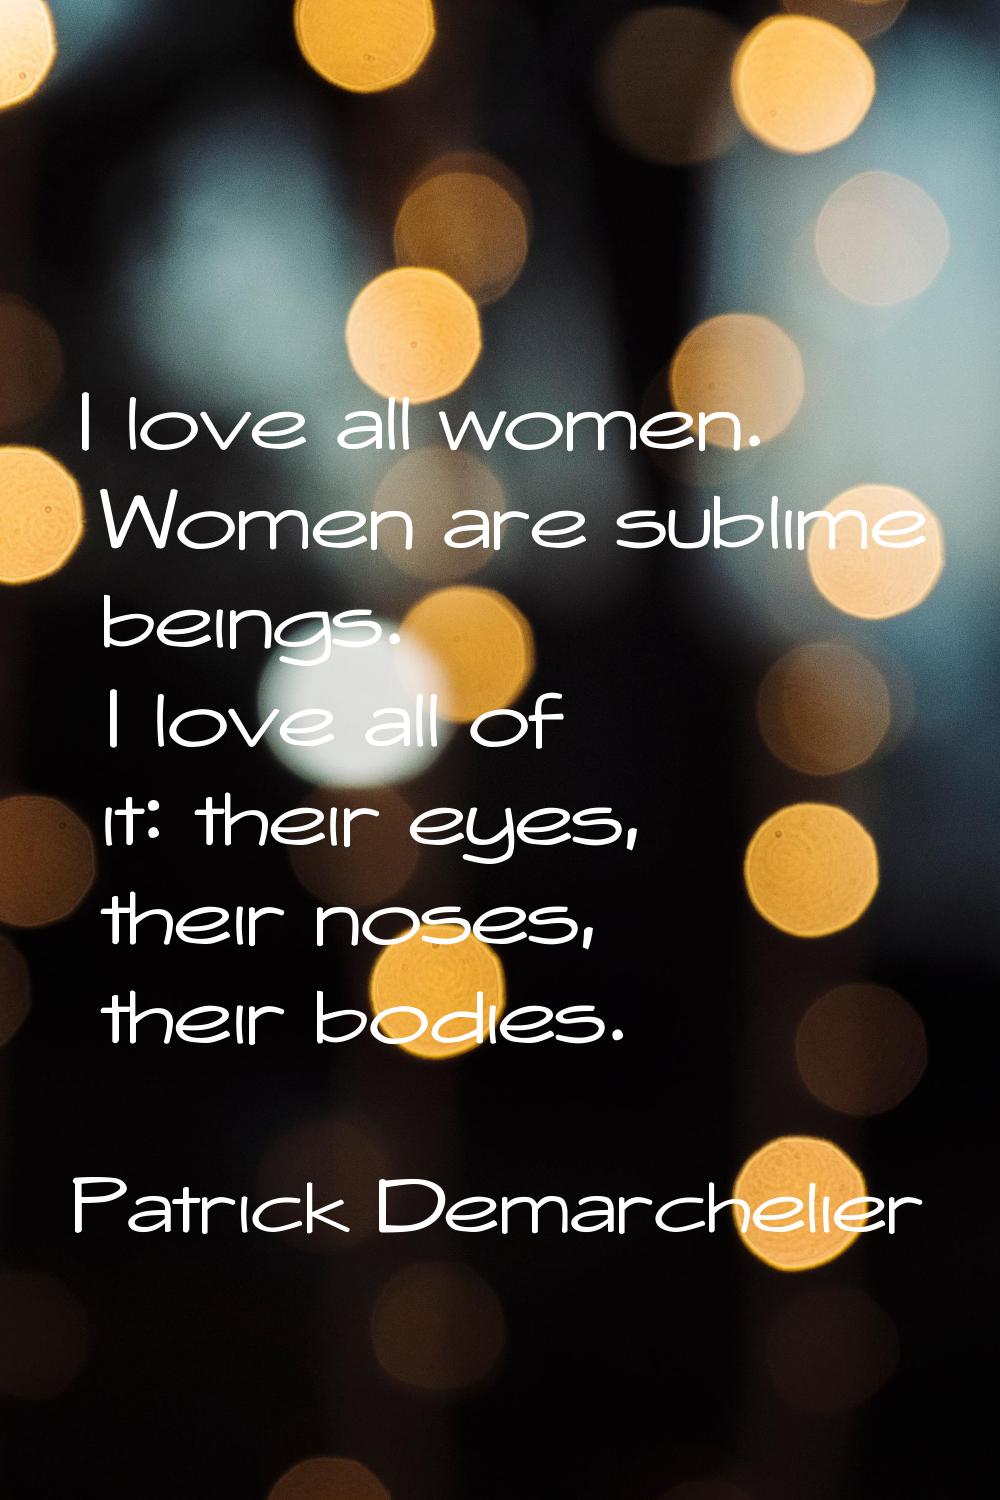 I love all women. Women are sublime beings. I love all of it: their eyes, their noses, their bodies